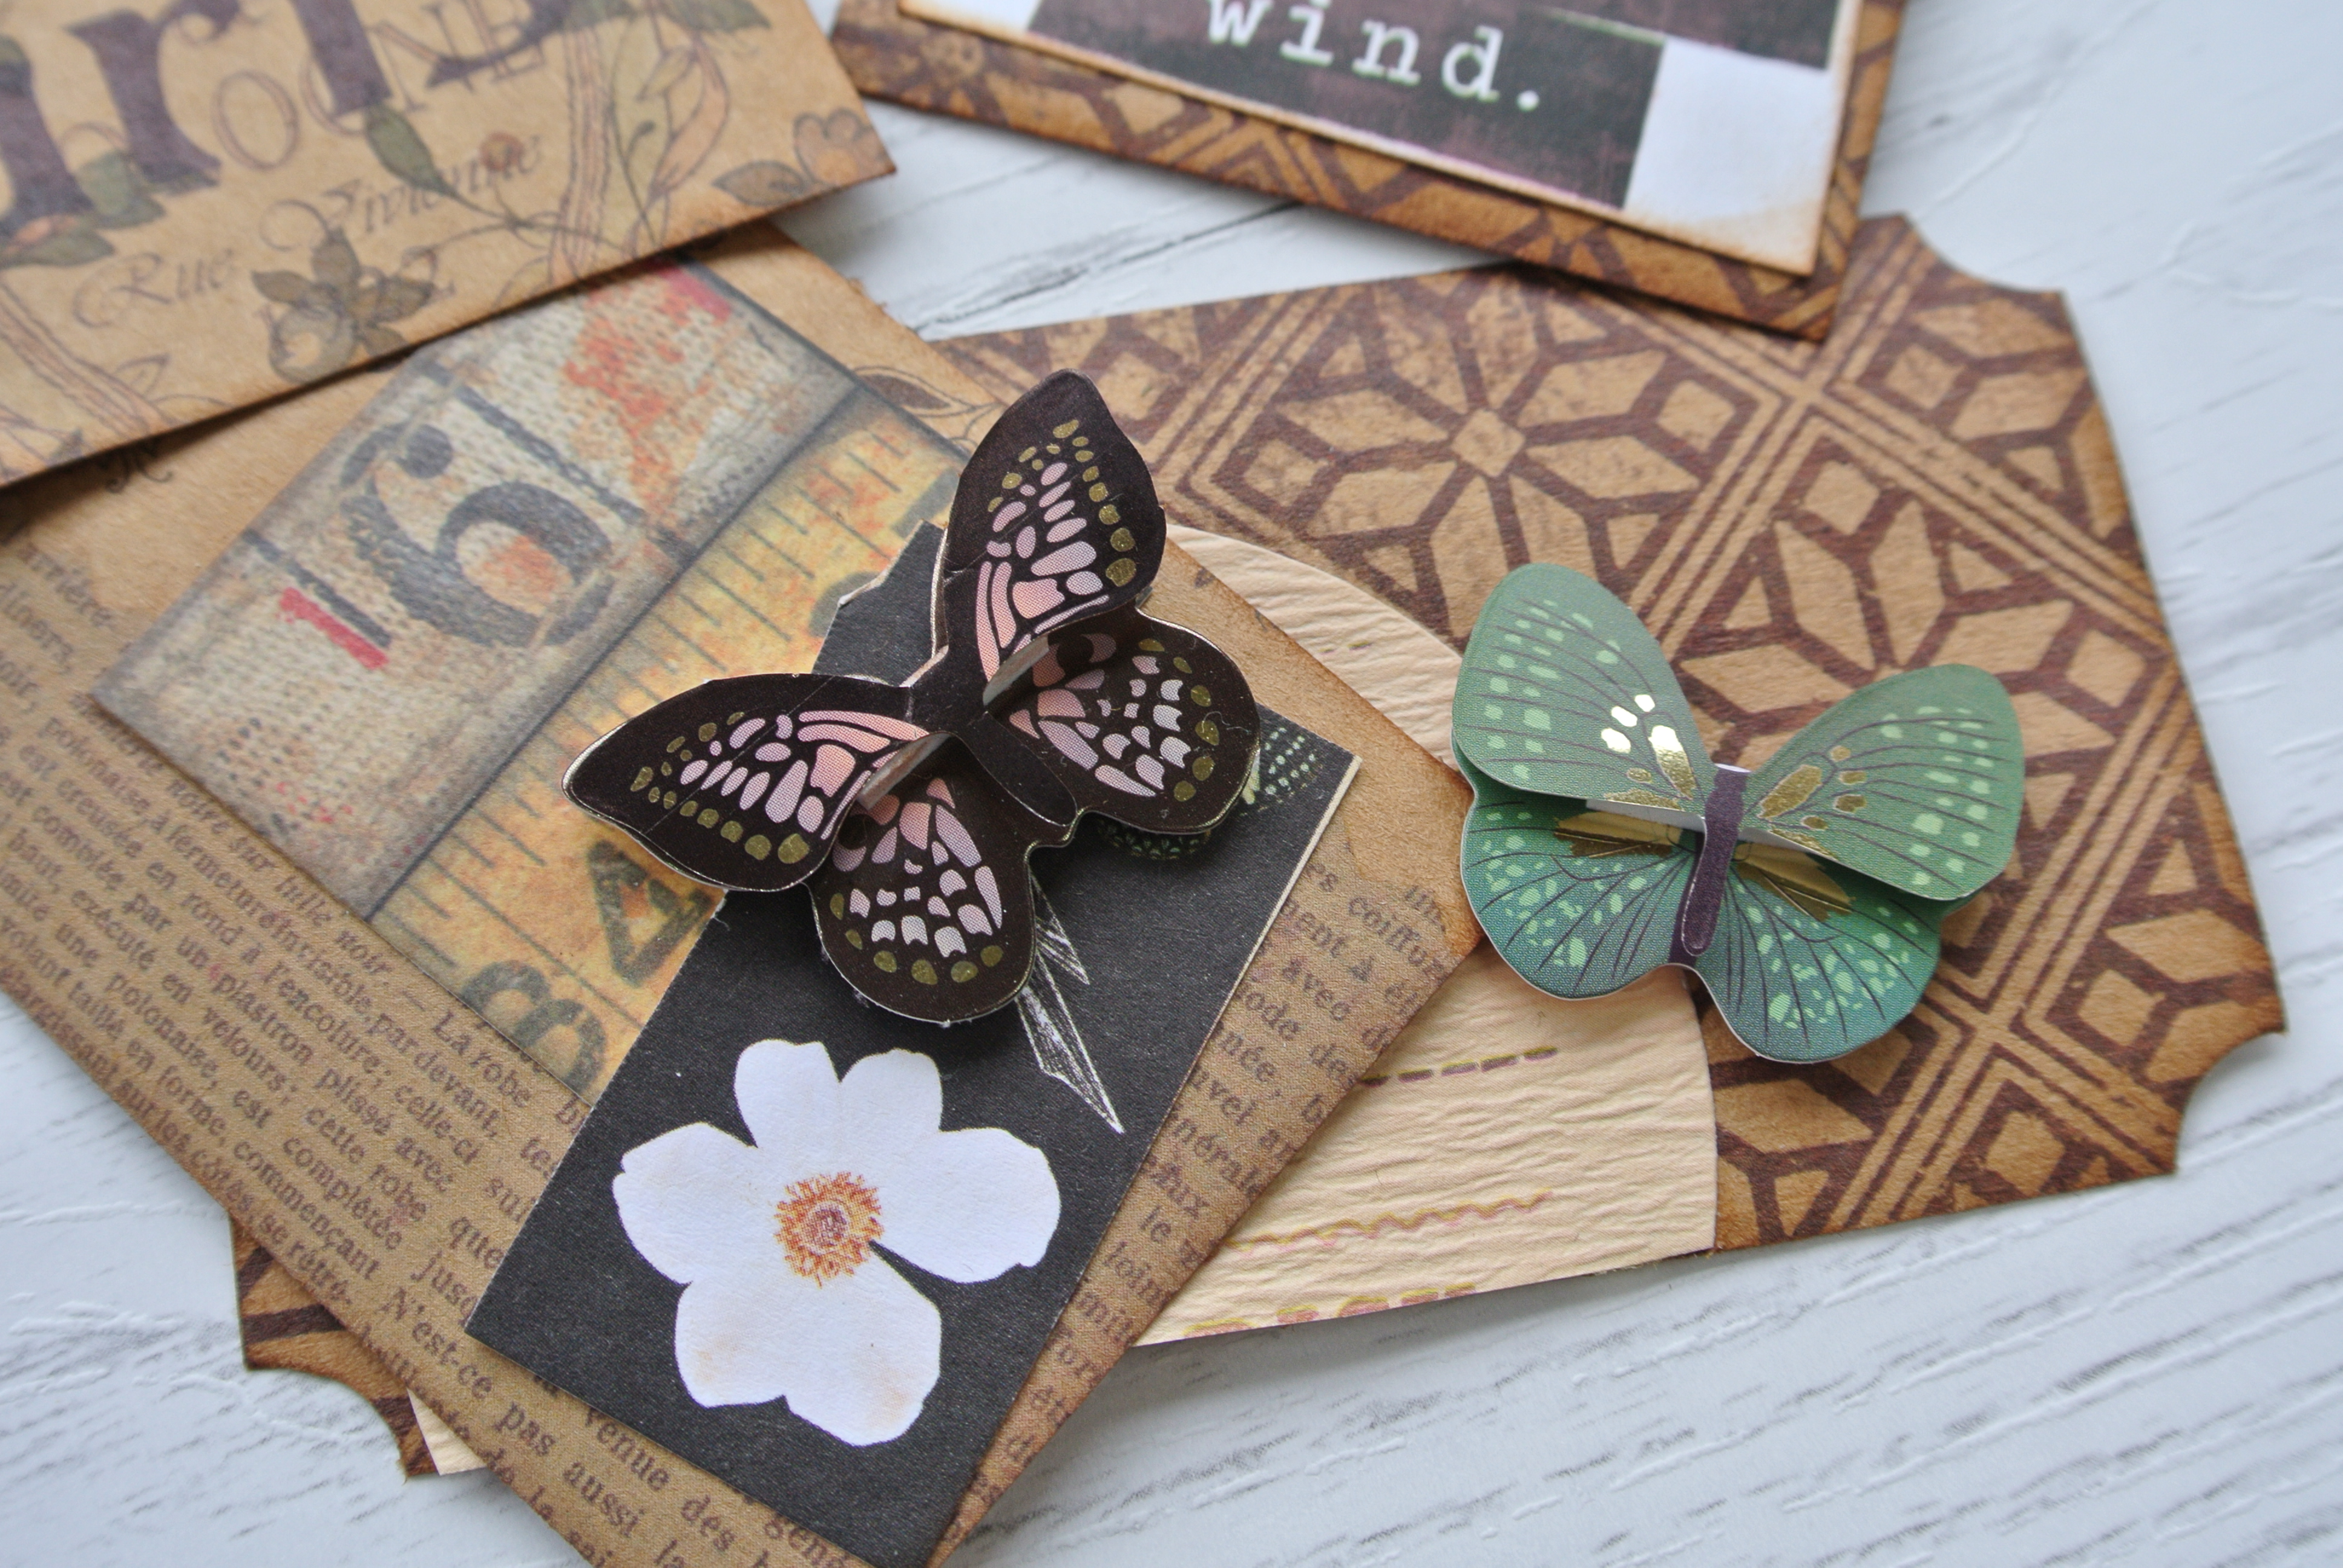 Ephemera for Junk Journals, Unique Book Page and Butterflies